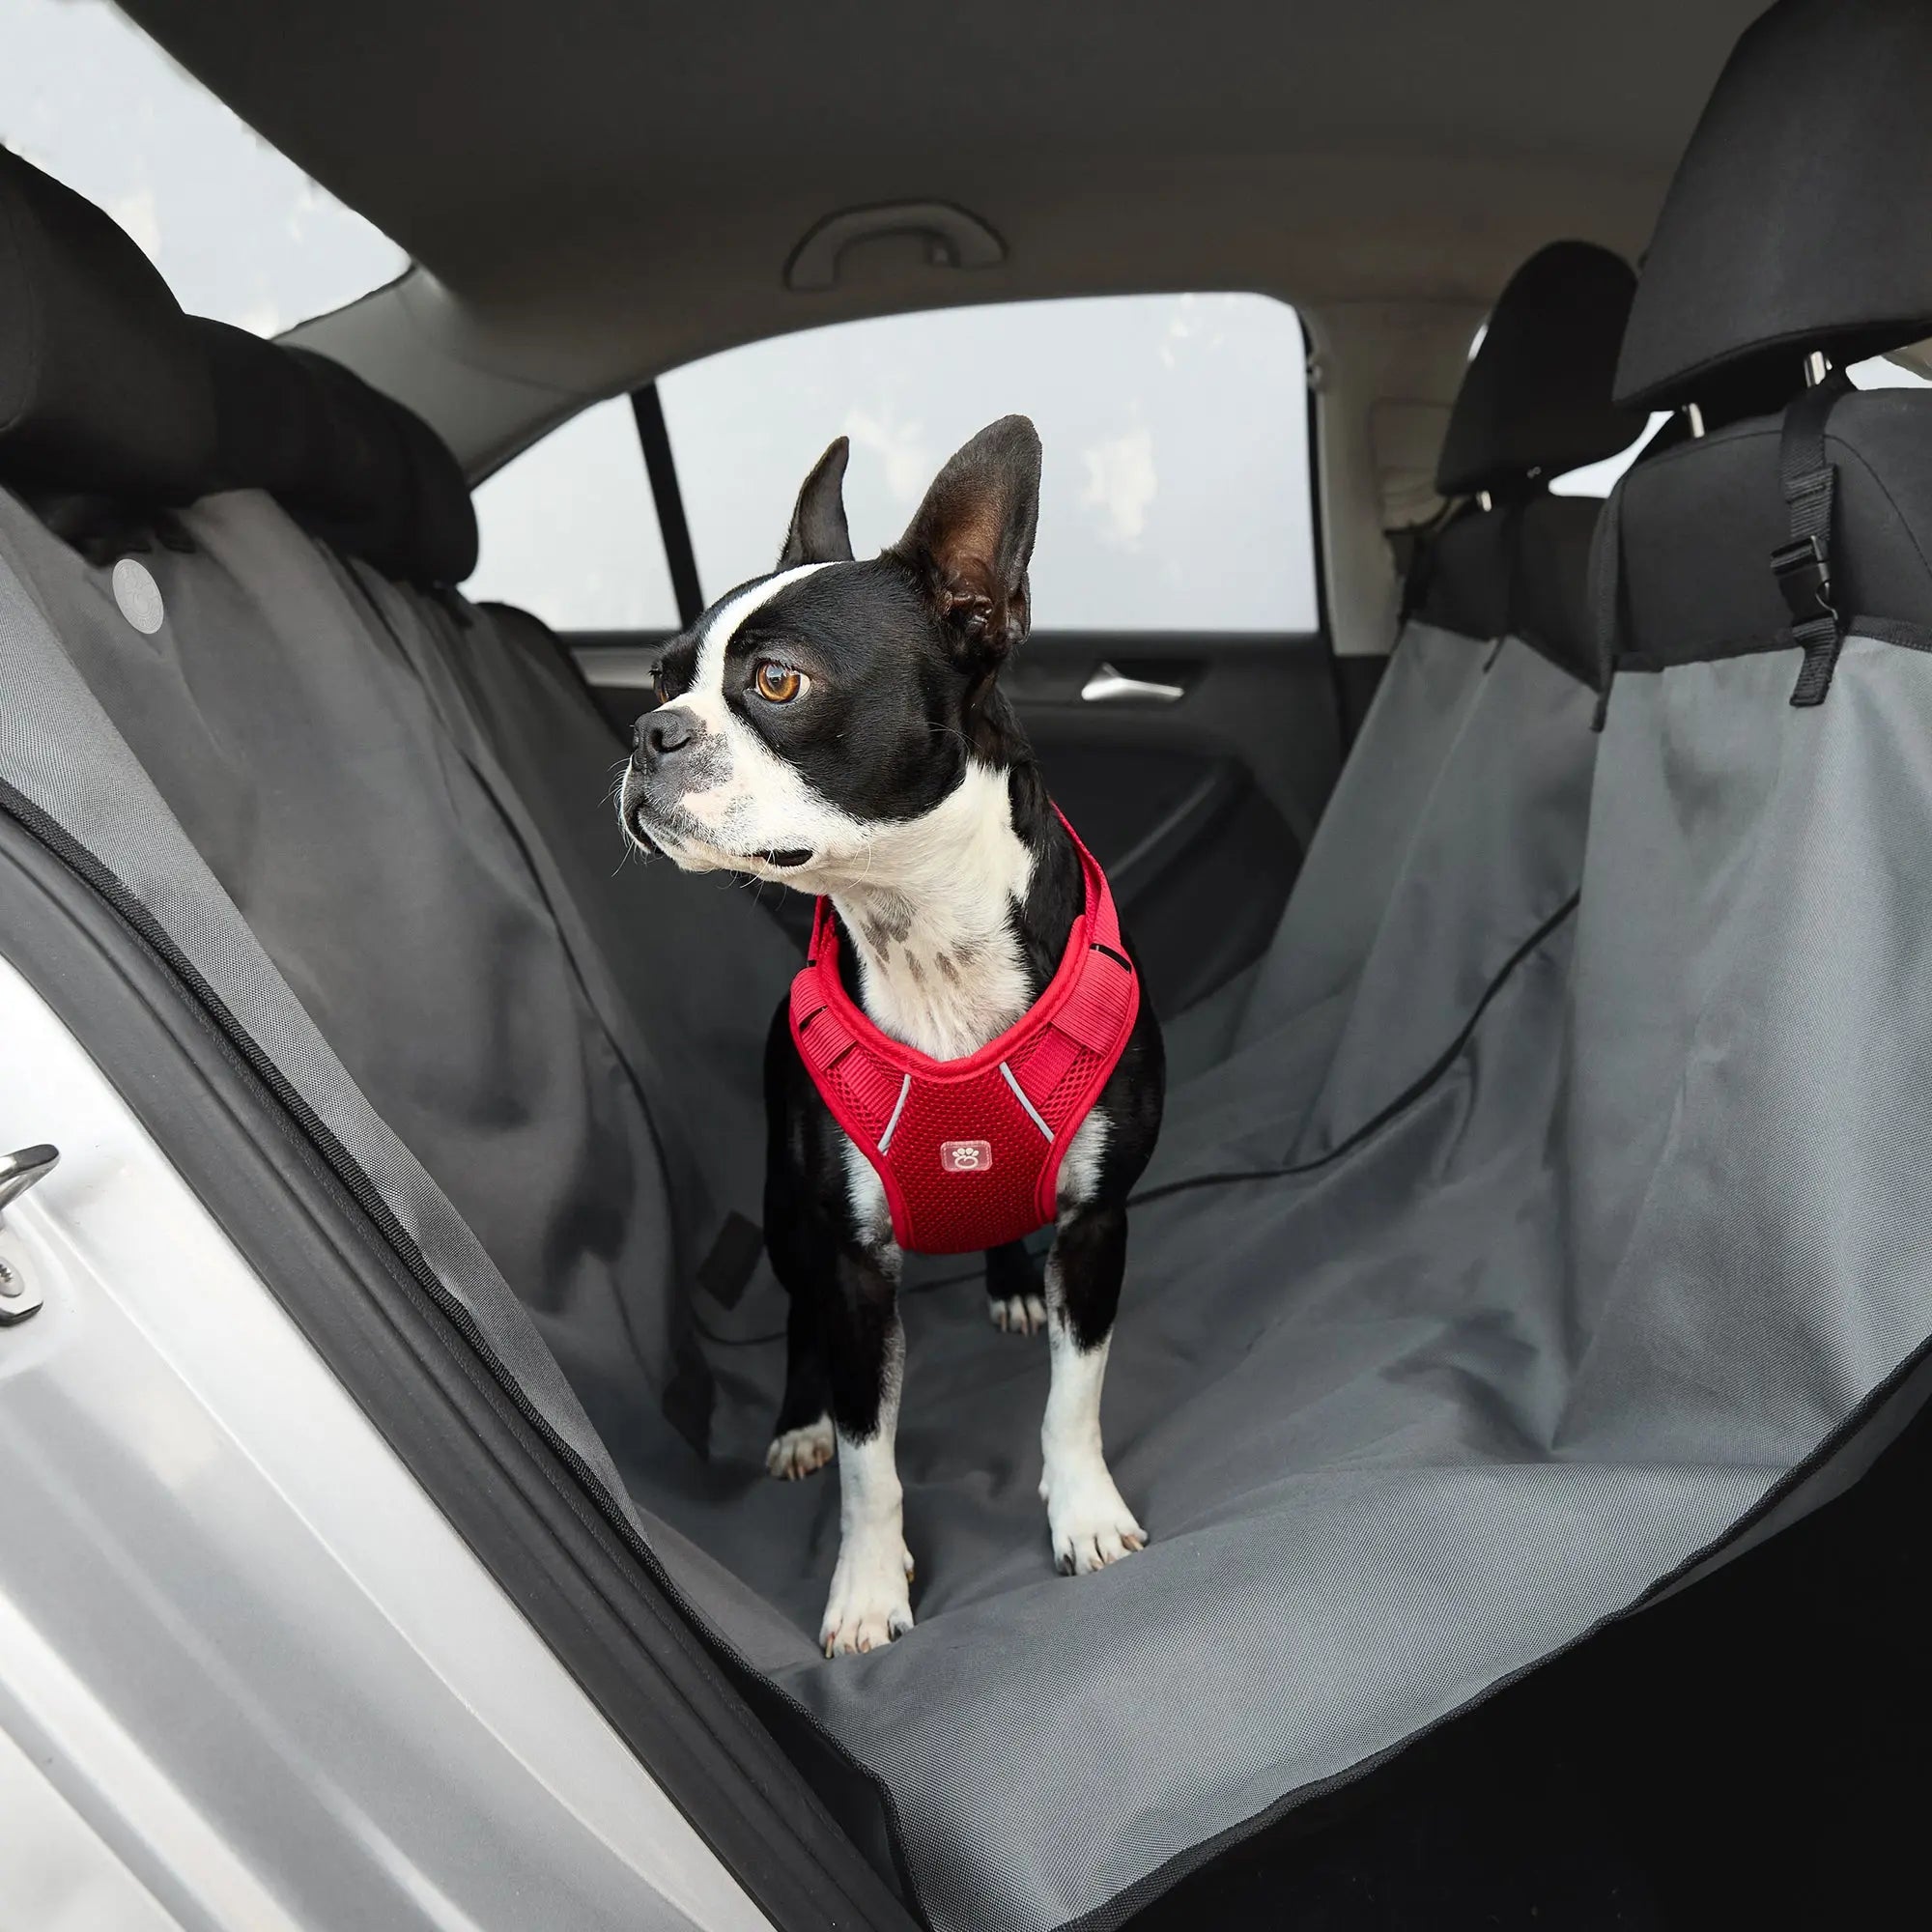 Meadowlark Dog Seat Cover with Mesh Window (Standard)